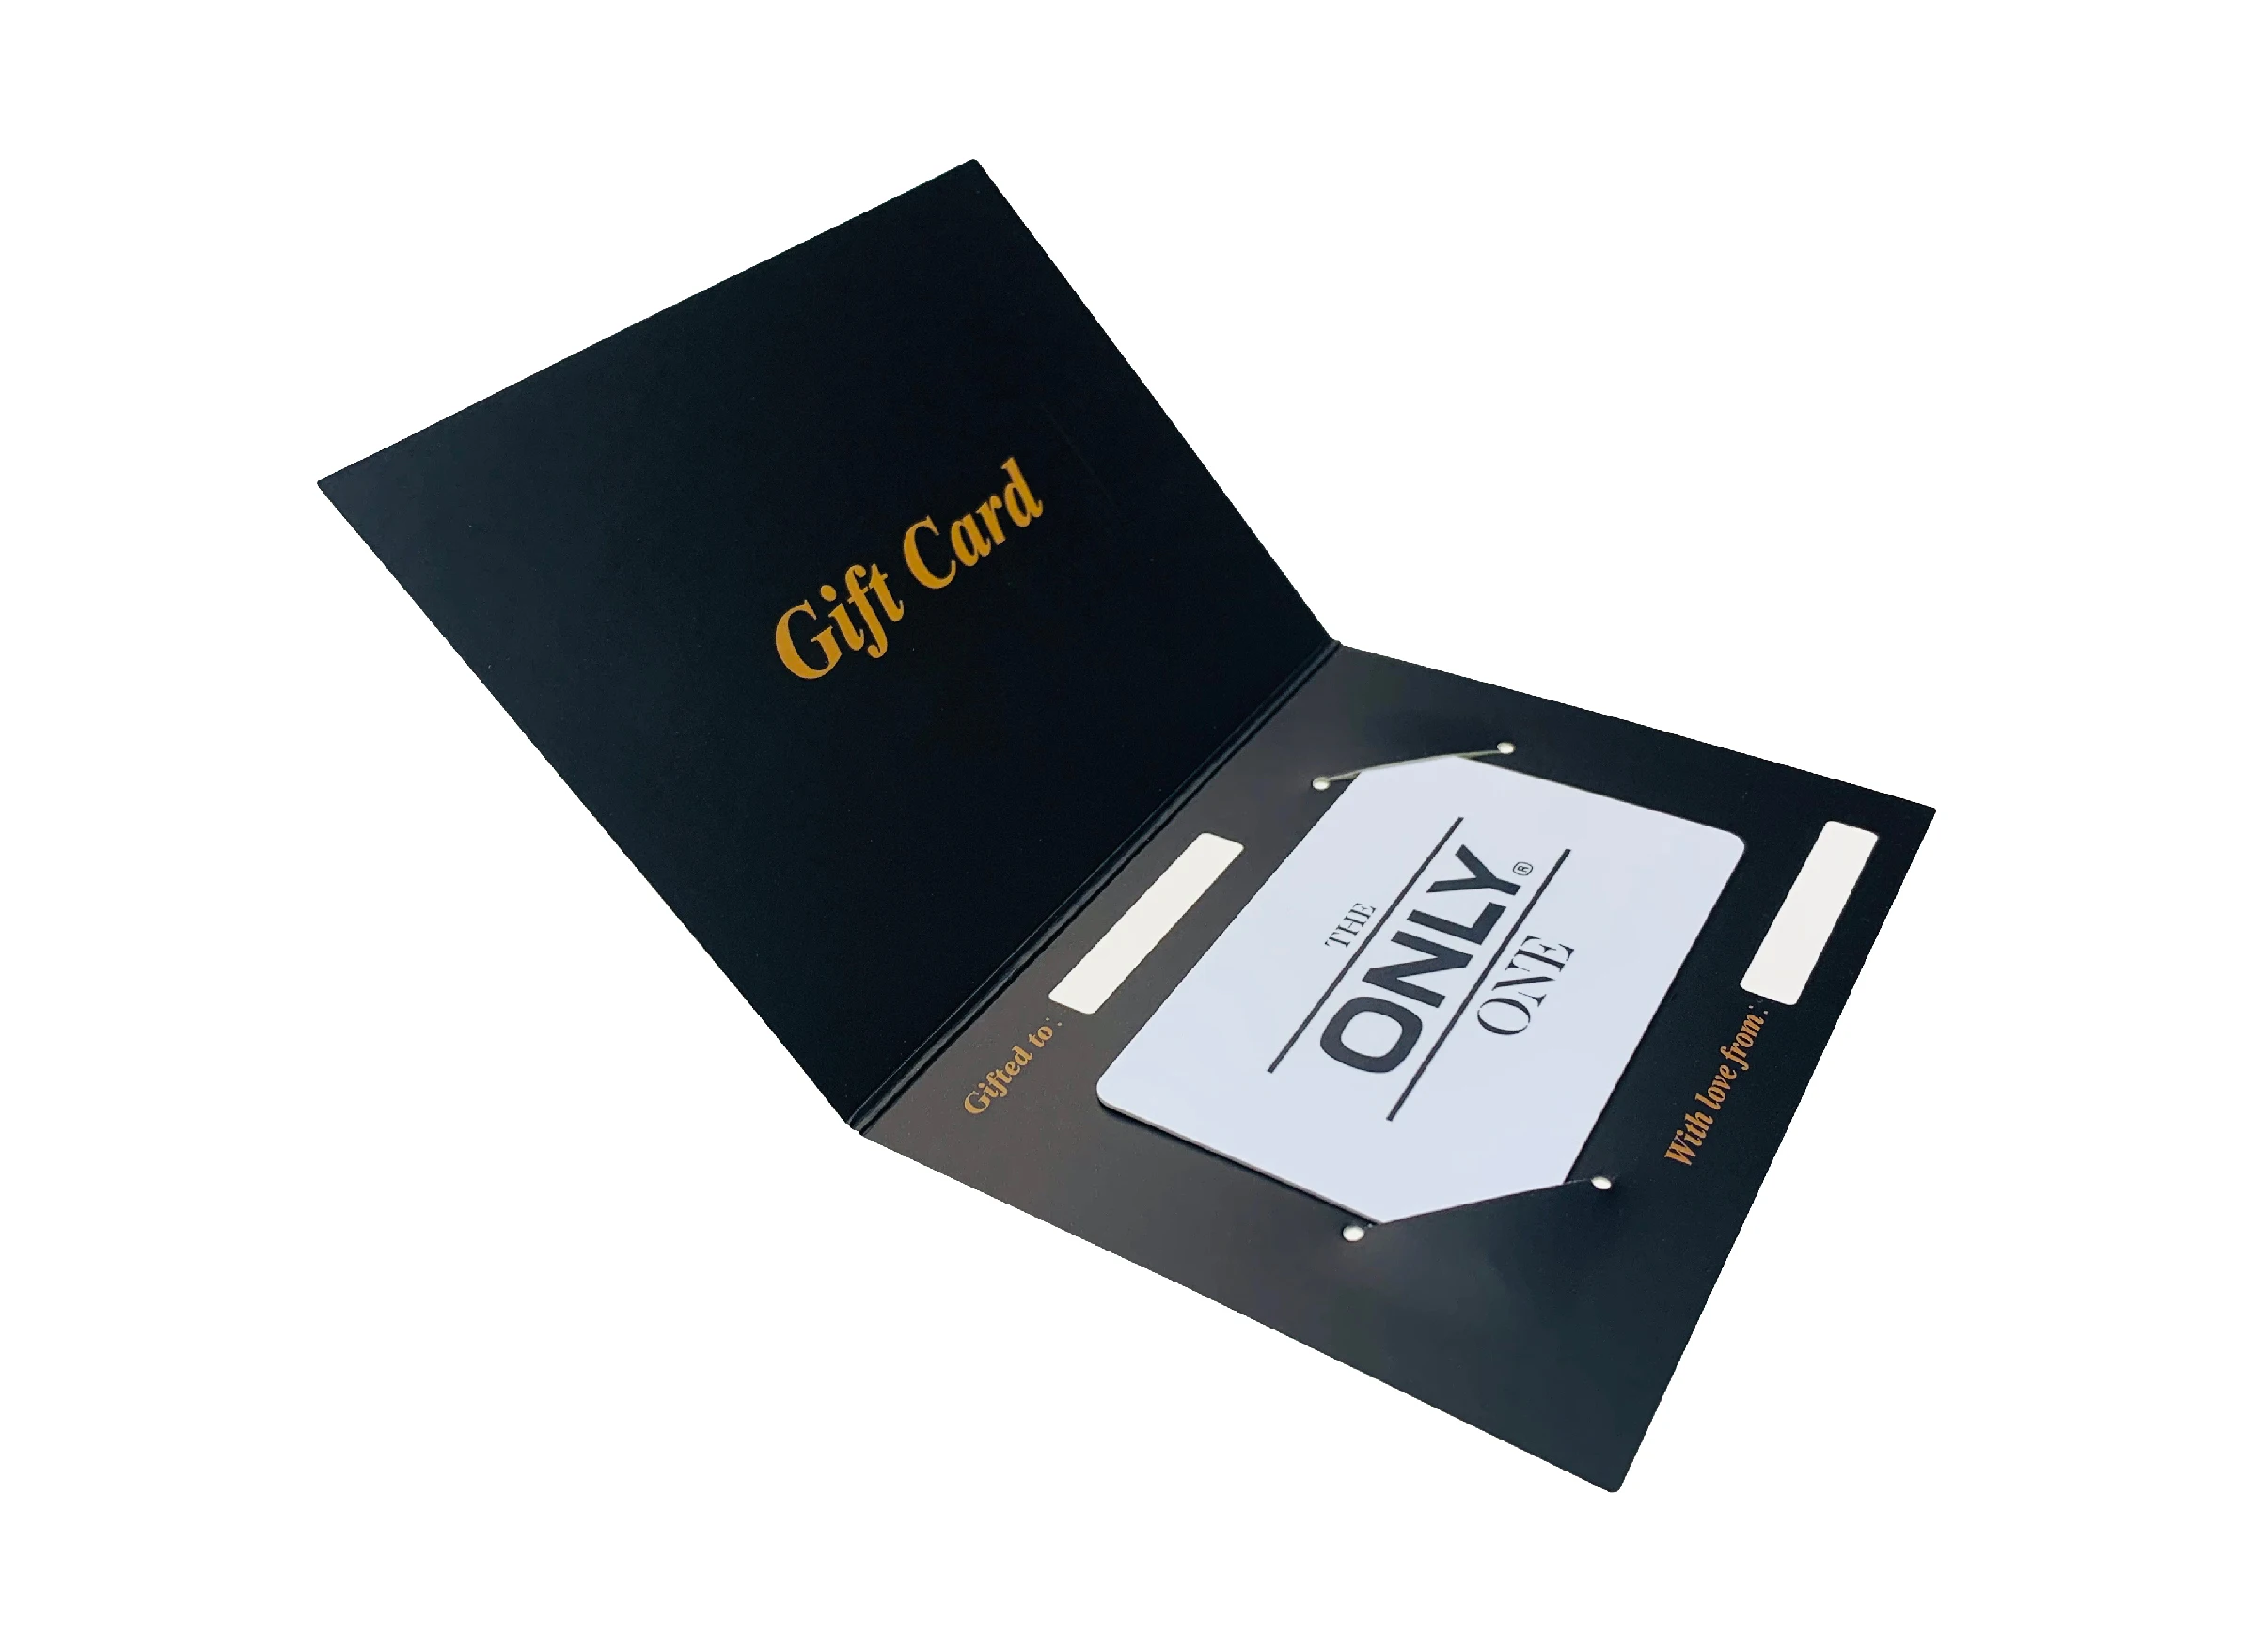 Only One Gift Card – Only One Gift Card